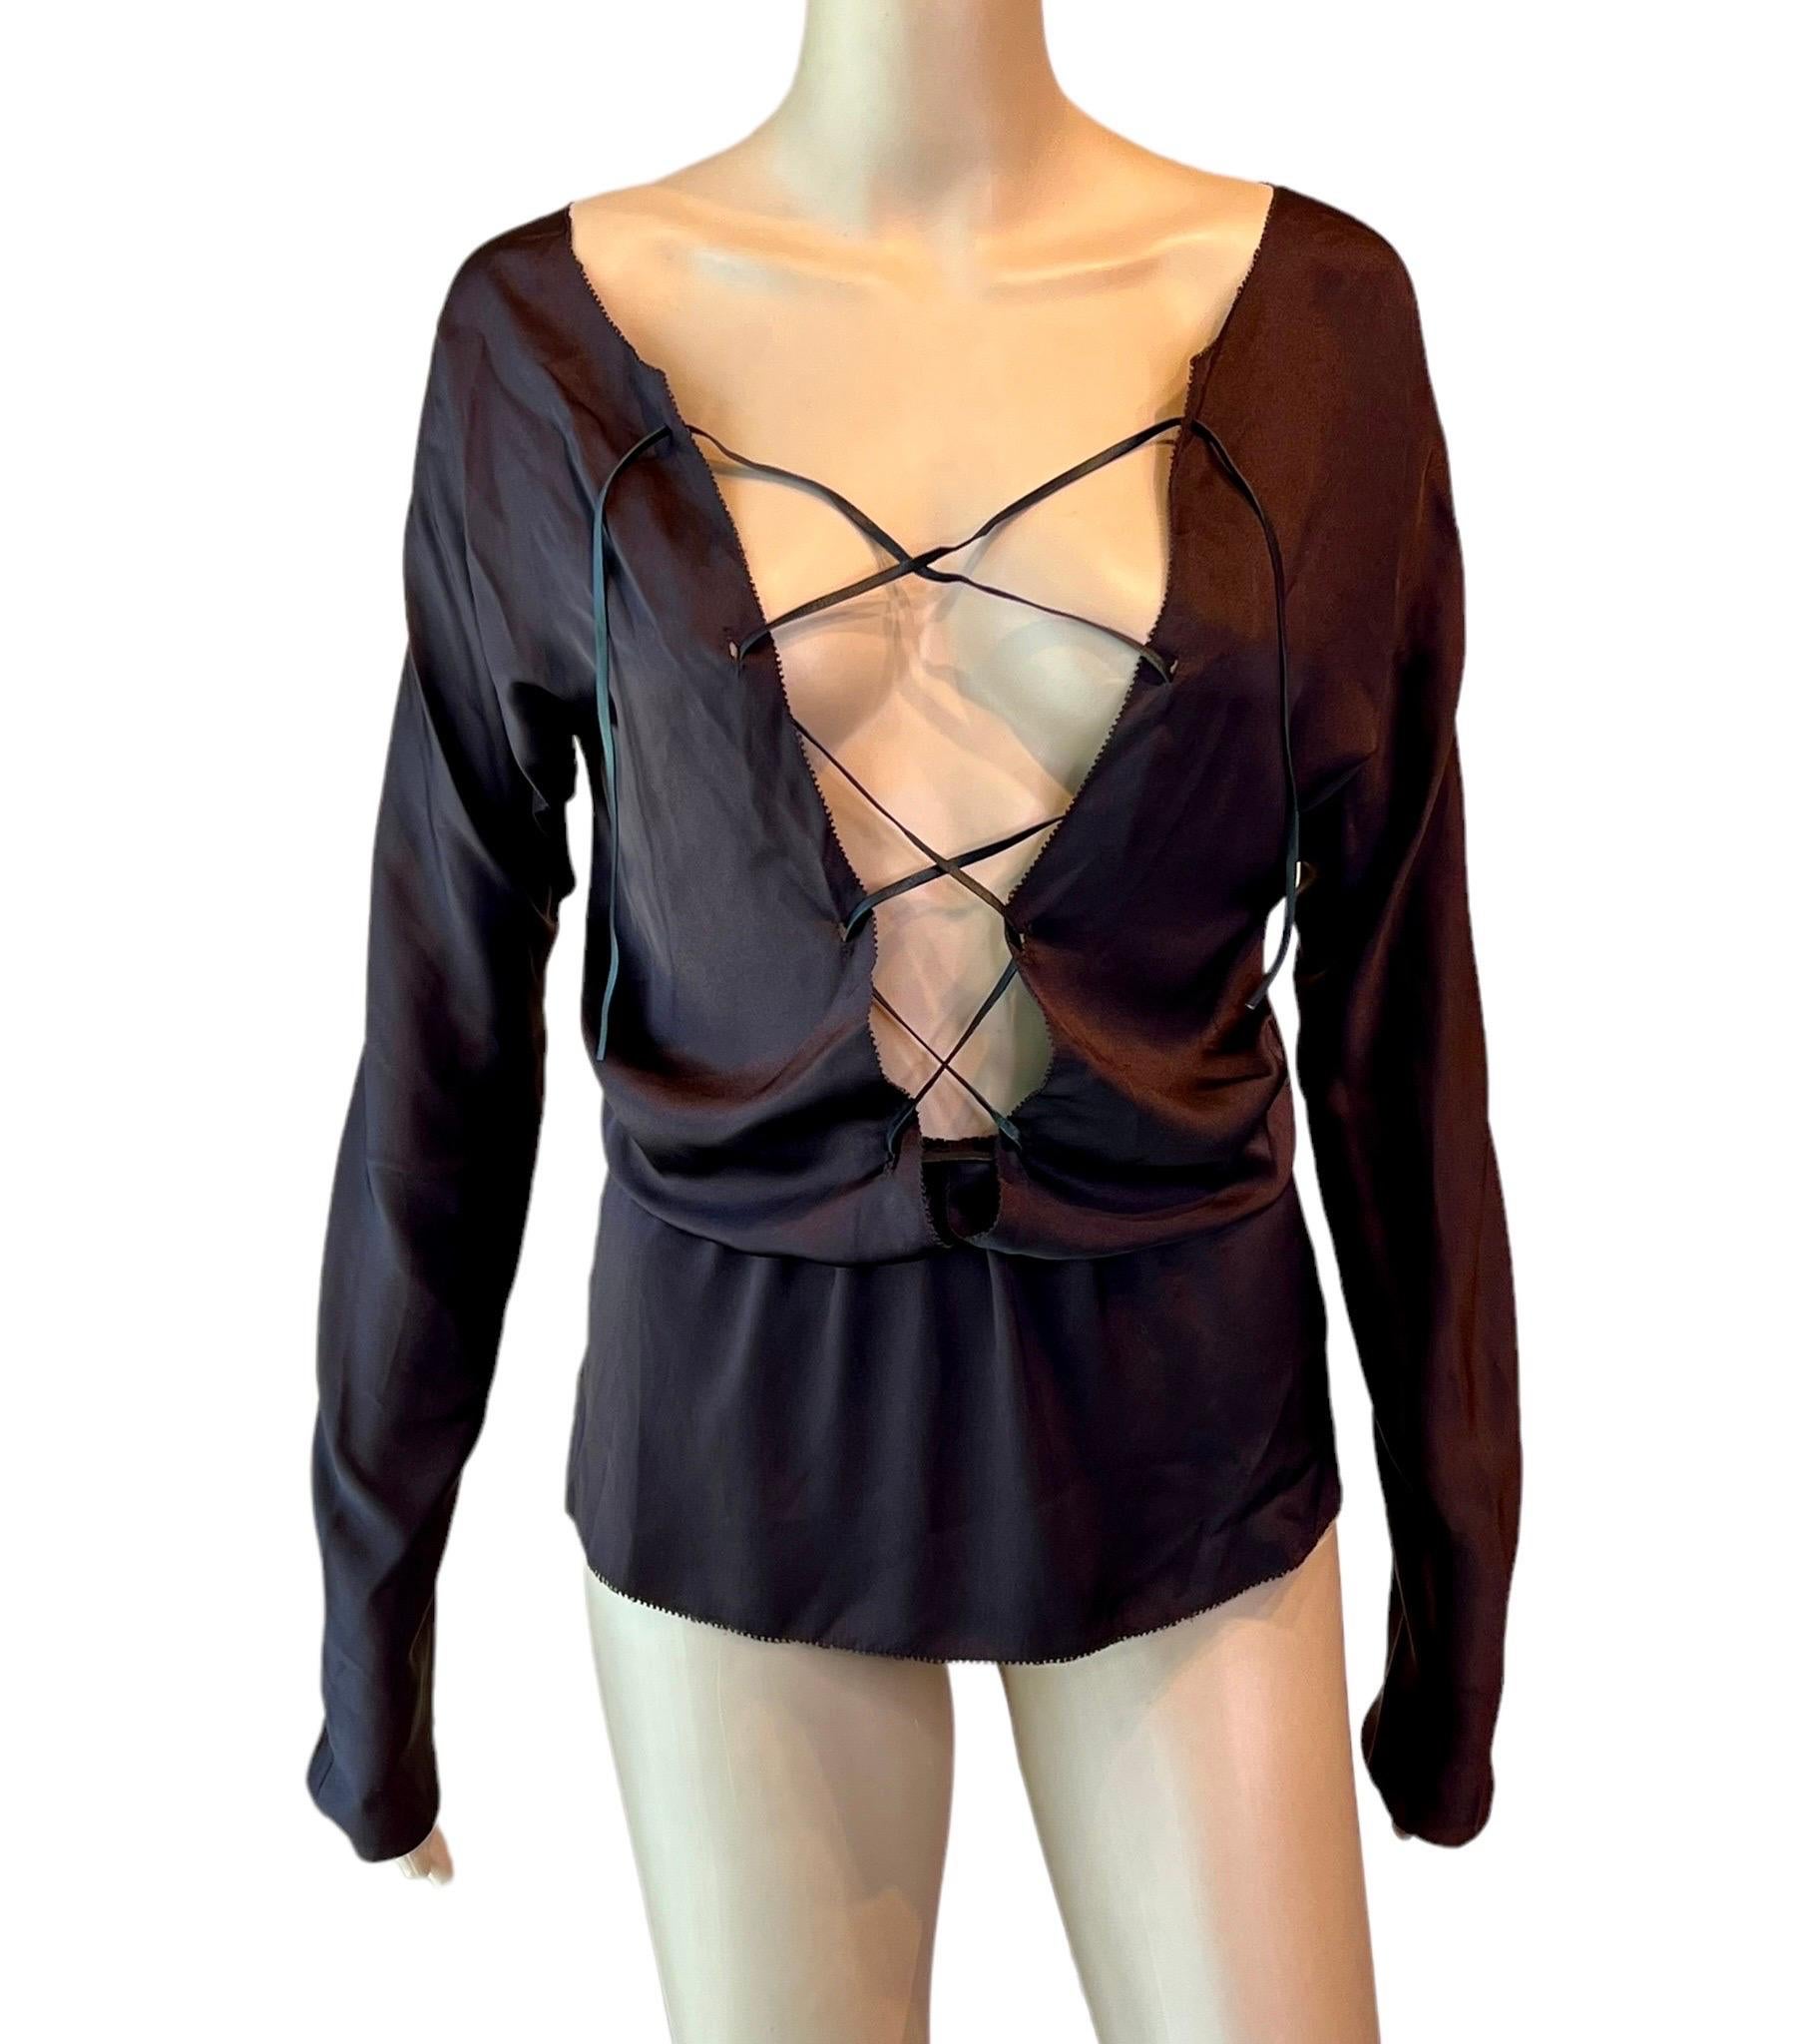 Tom Ford for Gucci F/W 2002 Runway Plunging Silk Lace-Up Brown Blouse Top (chemisier) en vente 1